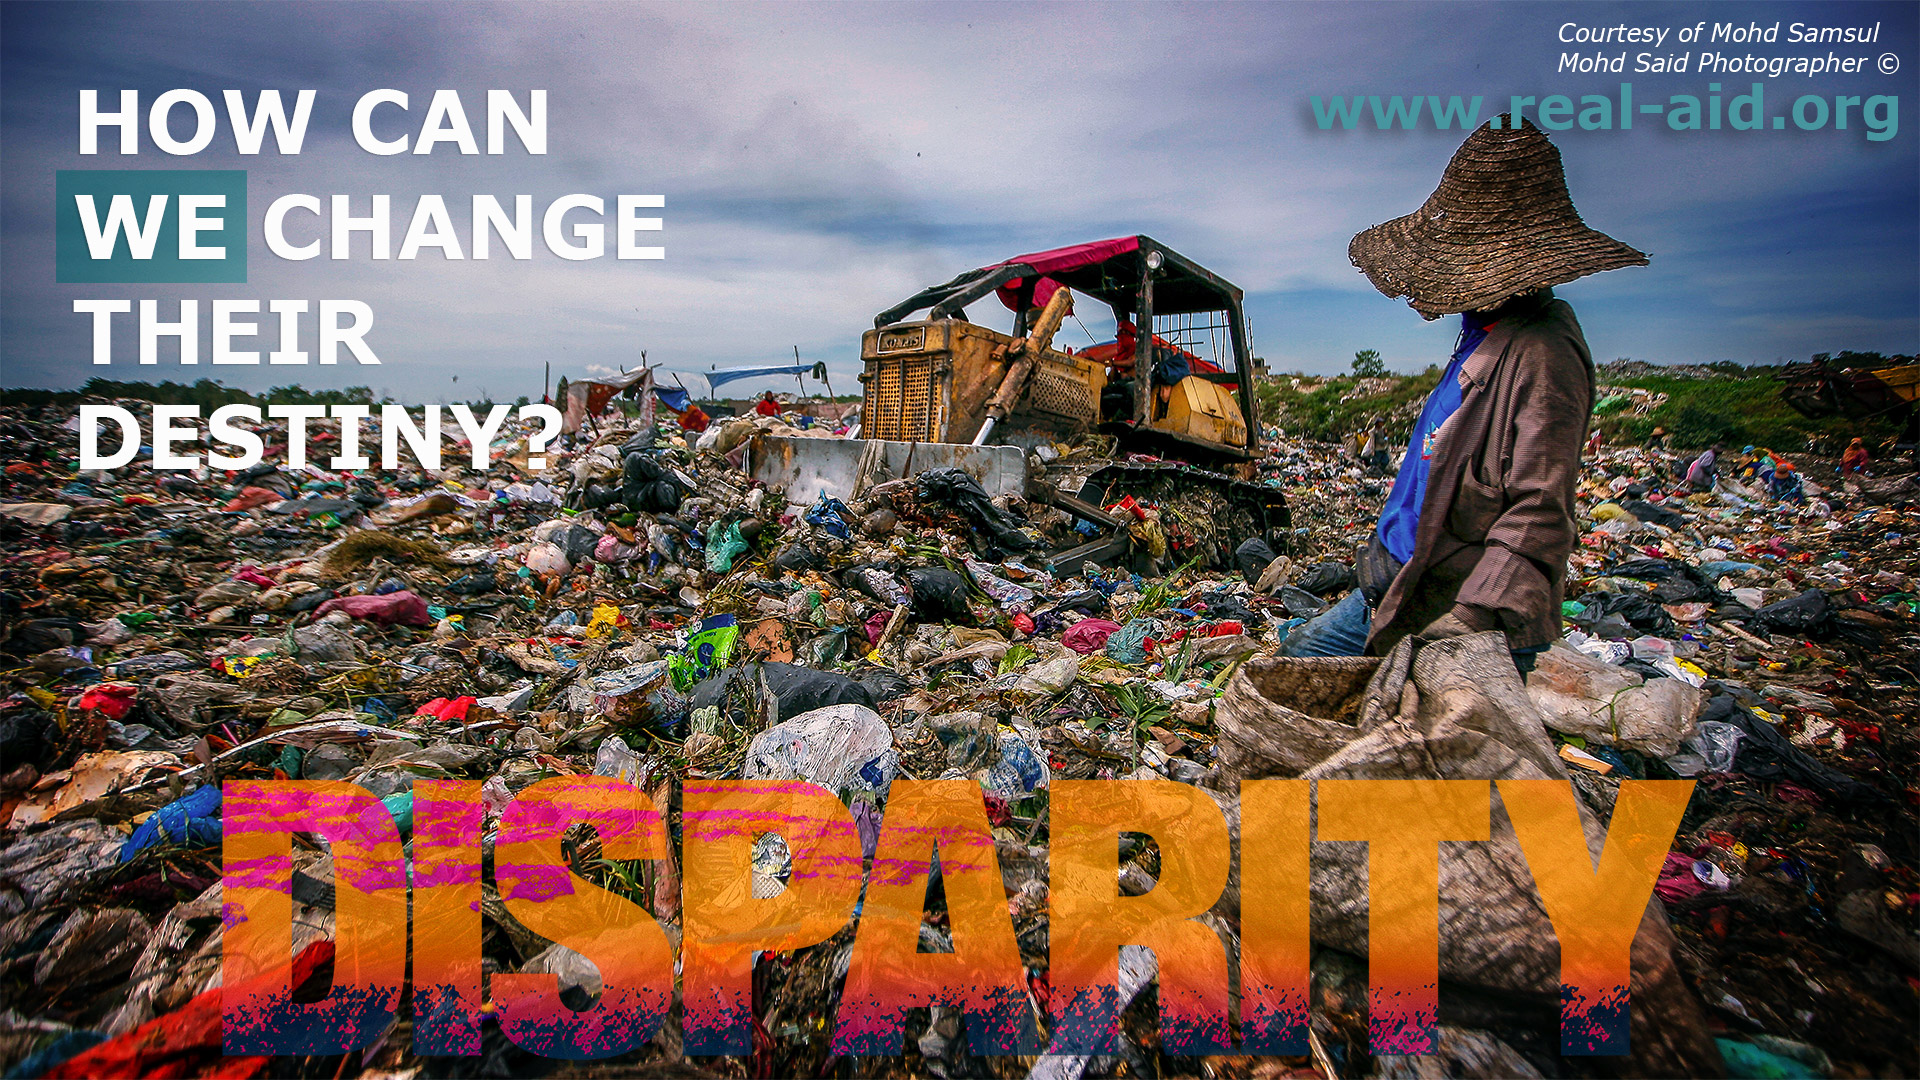 Disparity Film Poster, how can we change their destiny text, poverty in rubbish dump with bulldozer image